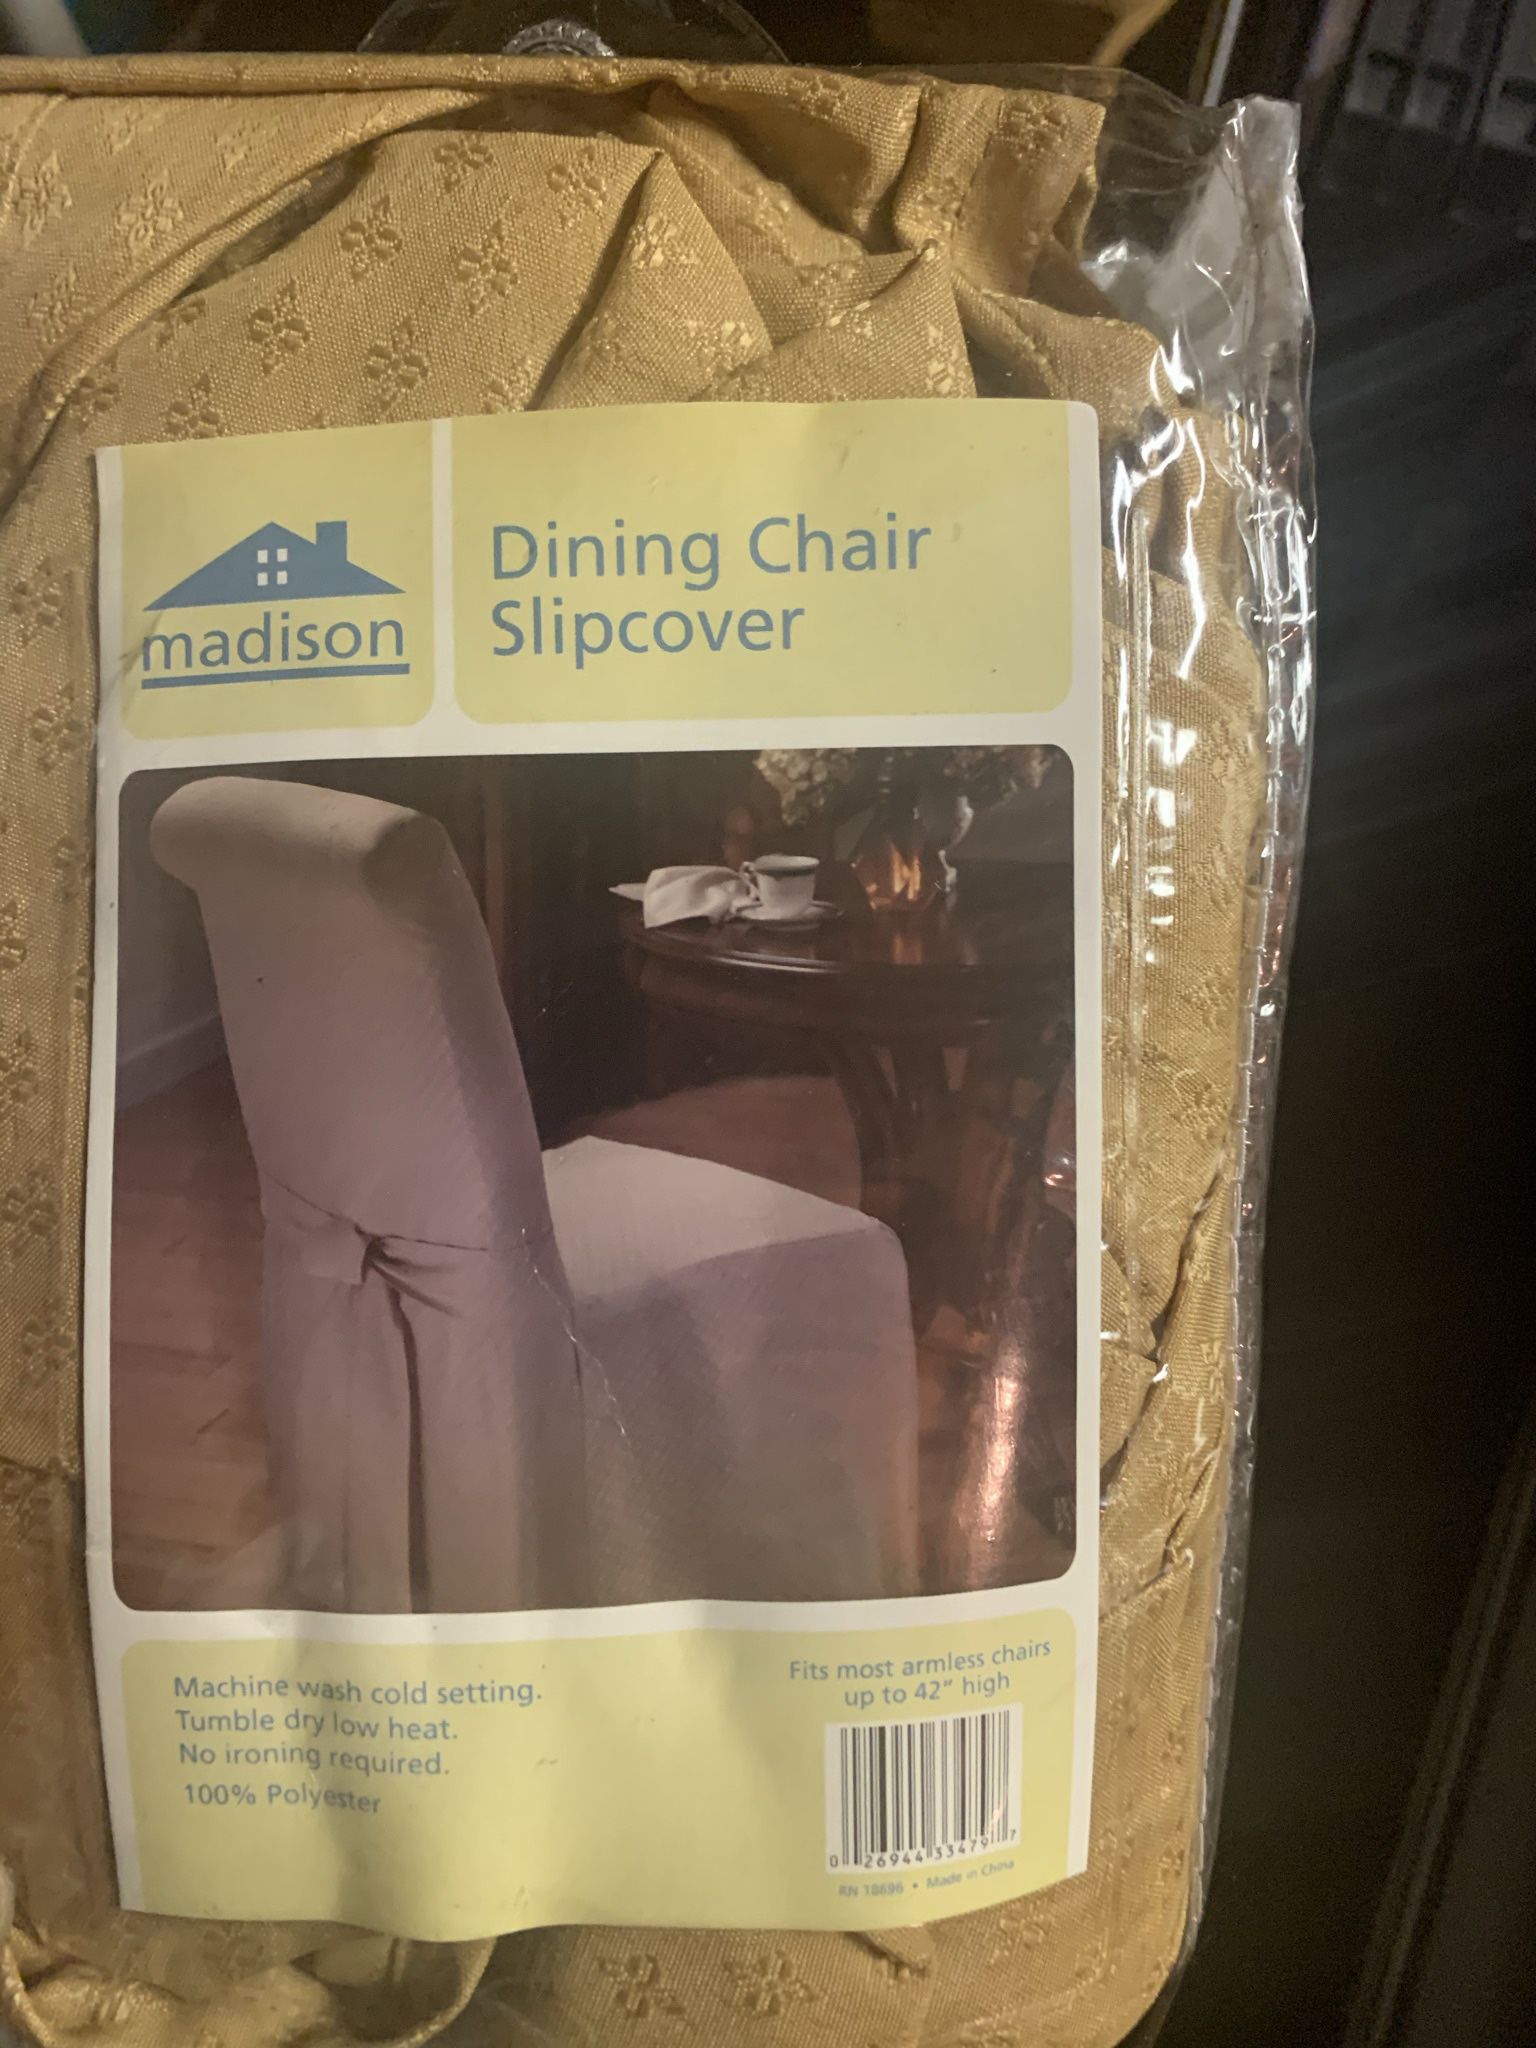 5x Dining Chair Slip Cover Fits Most armless Chairs 42”